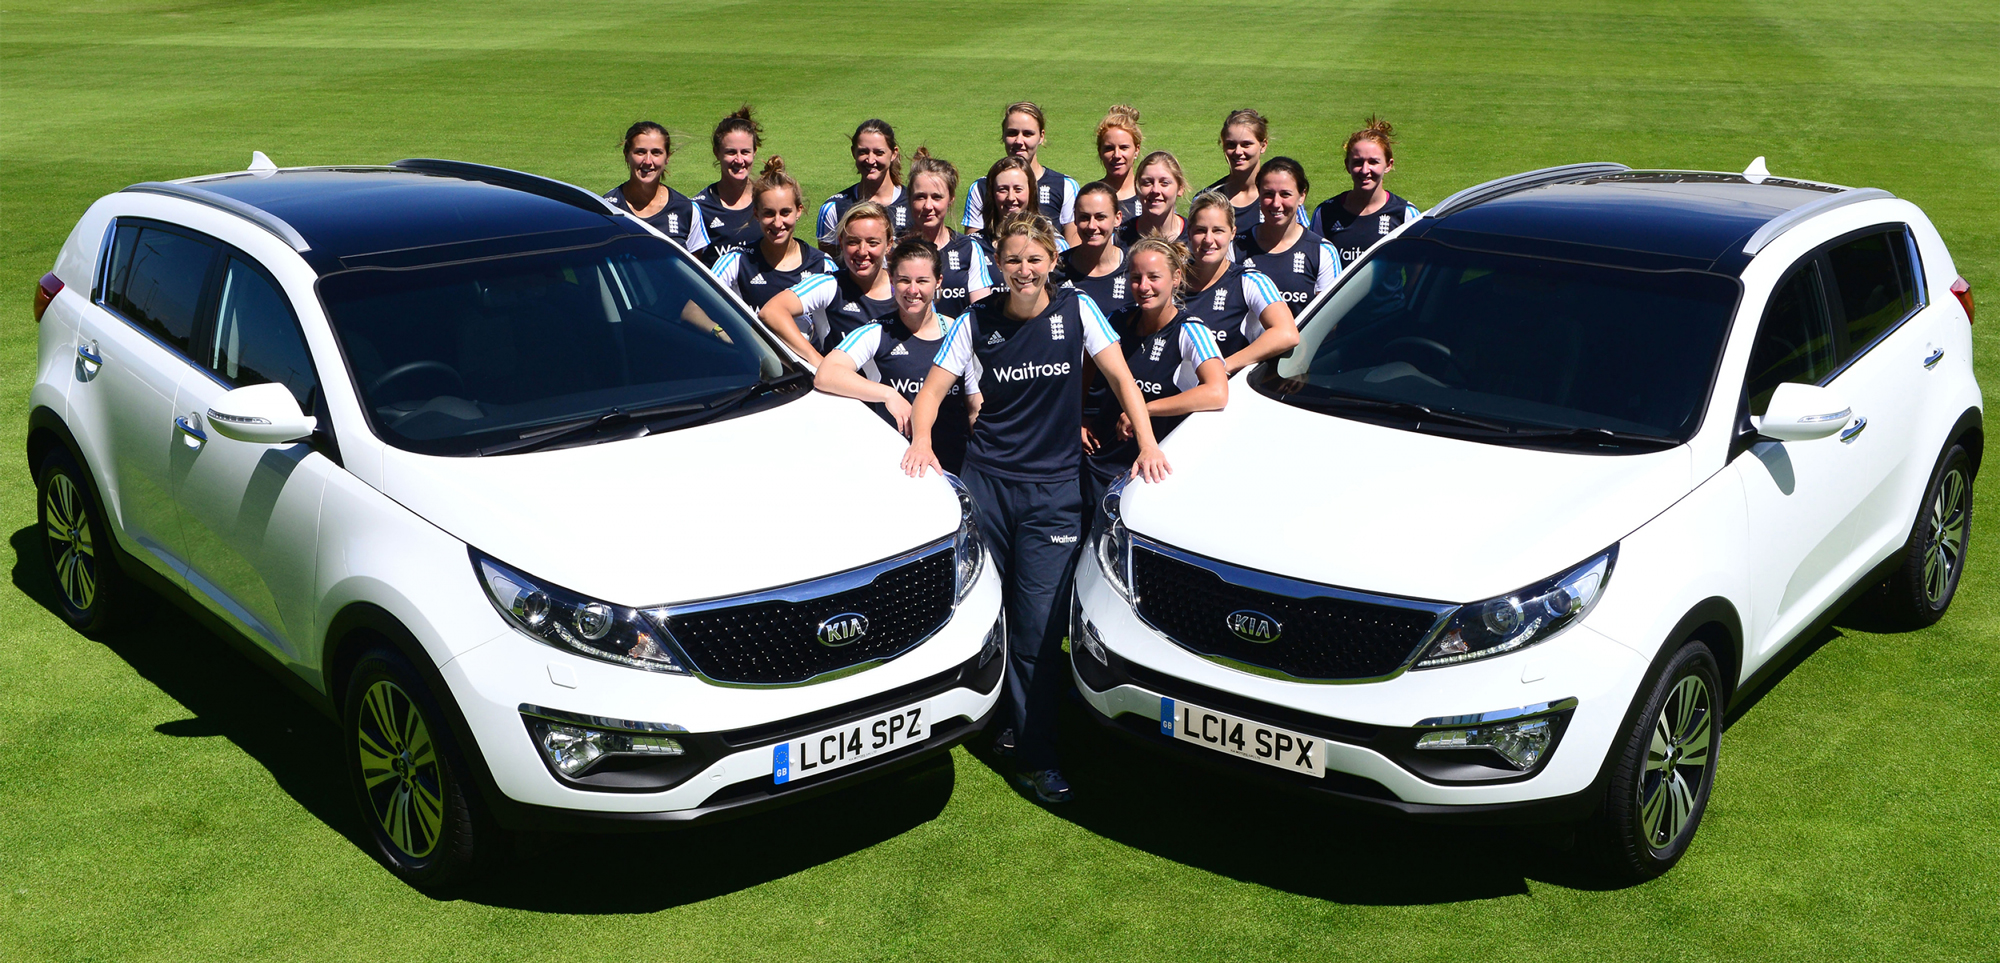 19 all-new Kia Sportage vehicles have been provided to the England women's cricket team